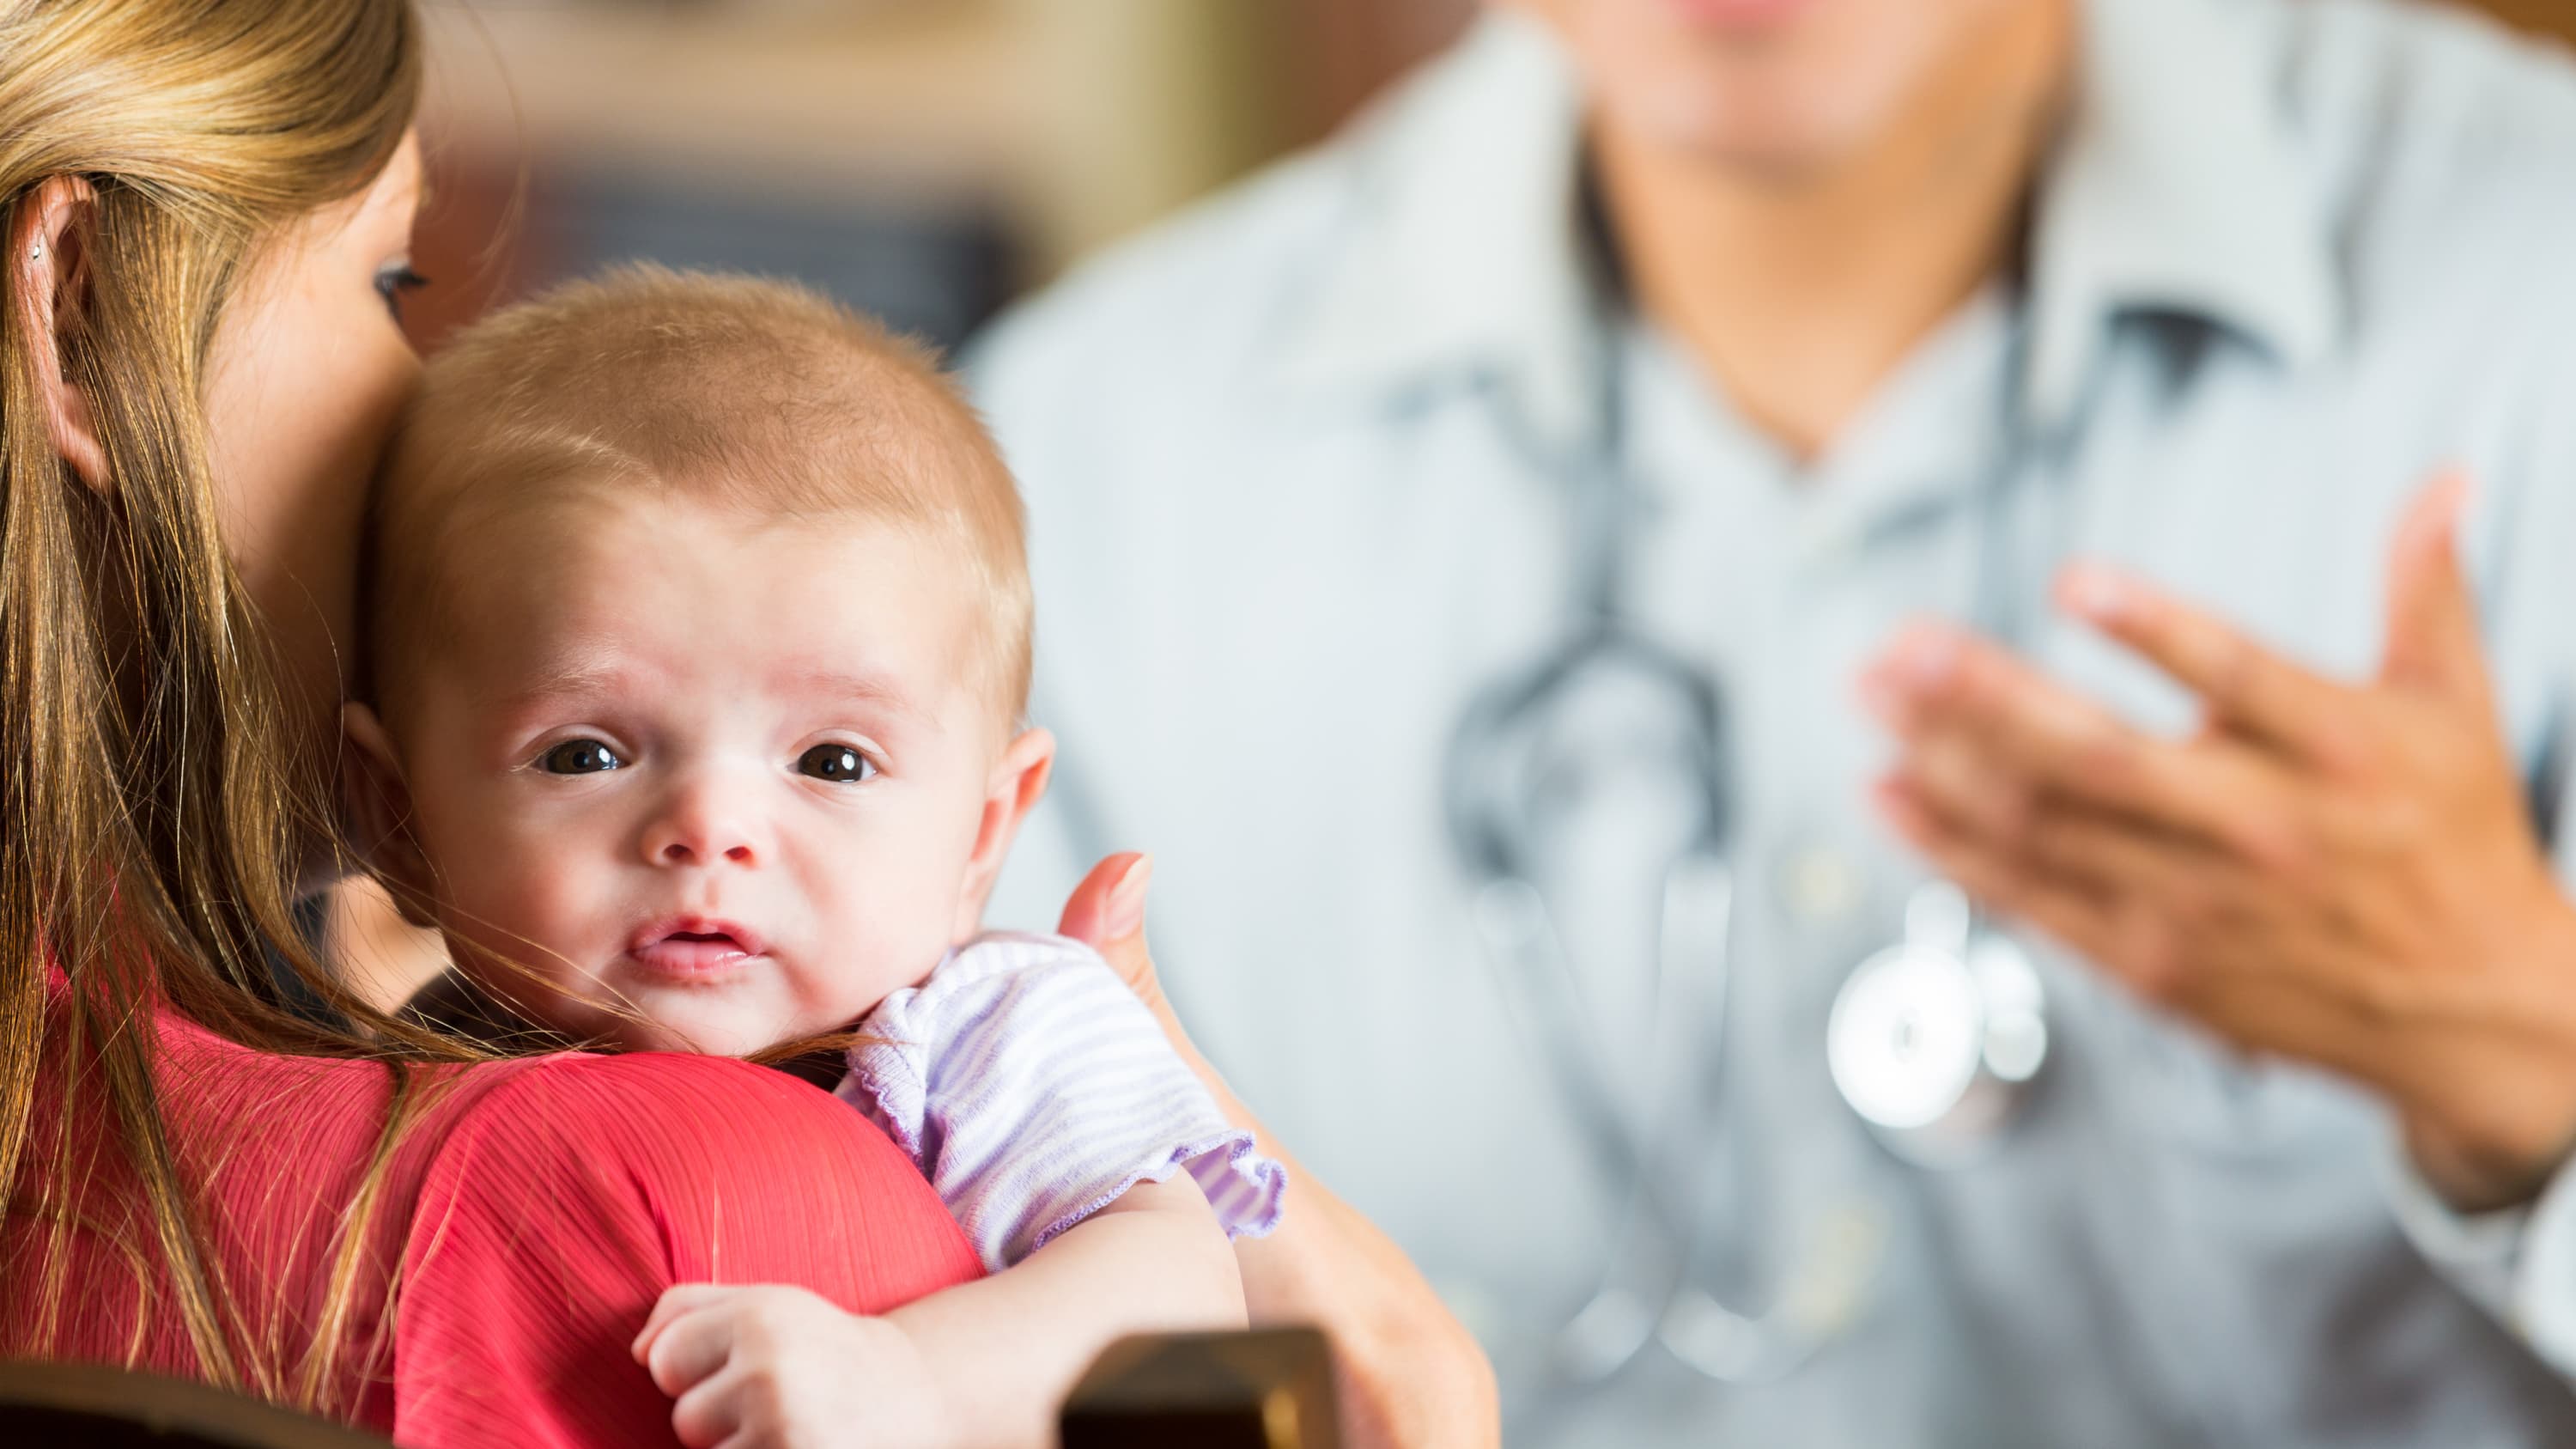 A baby with cystic fibrosis is comforted during a visit to the doctor.